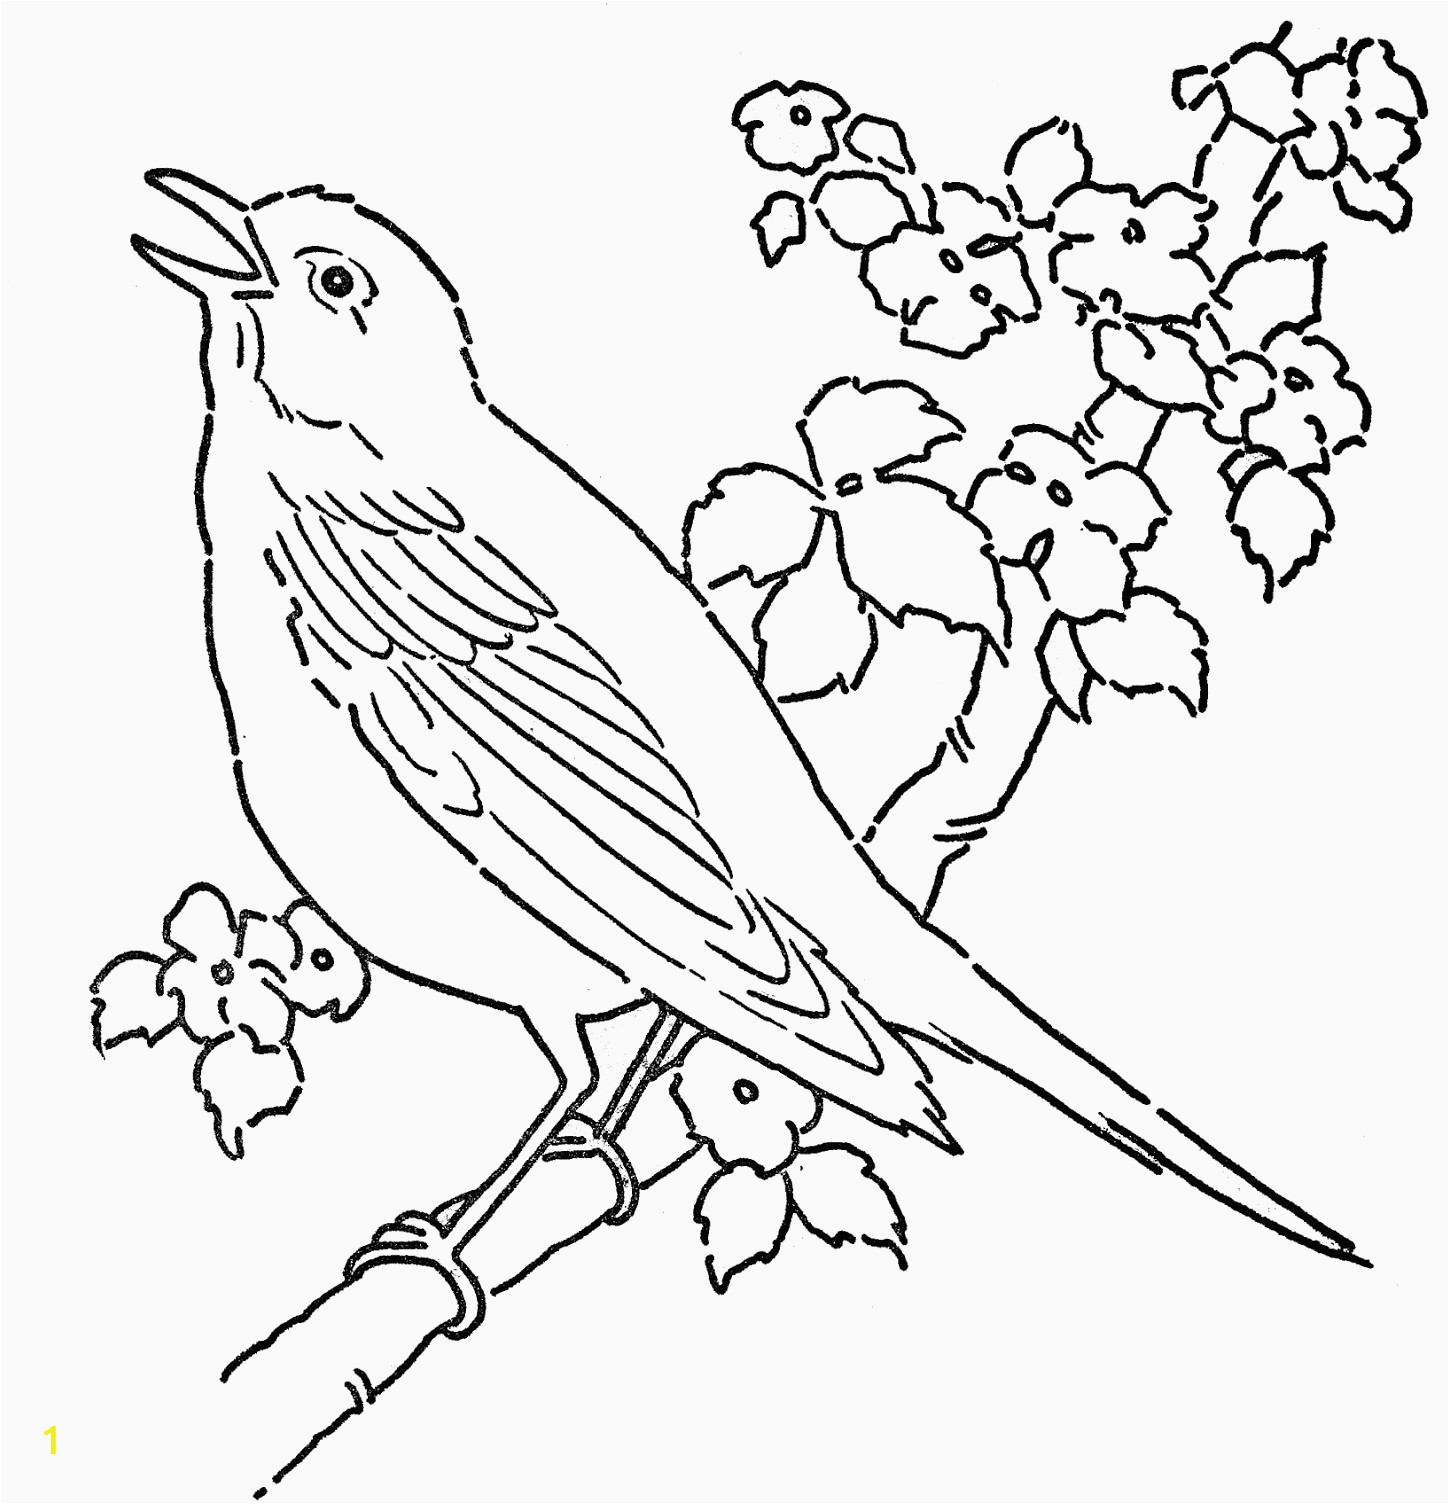 Bird Nest Coloring Page Coloring Page A Bird Nest